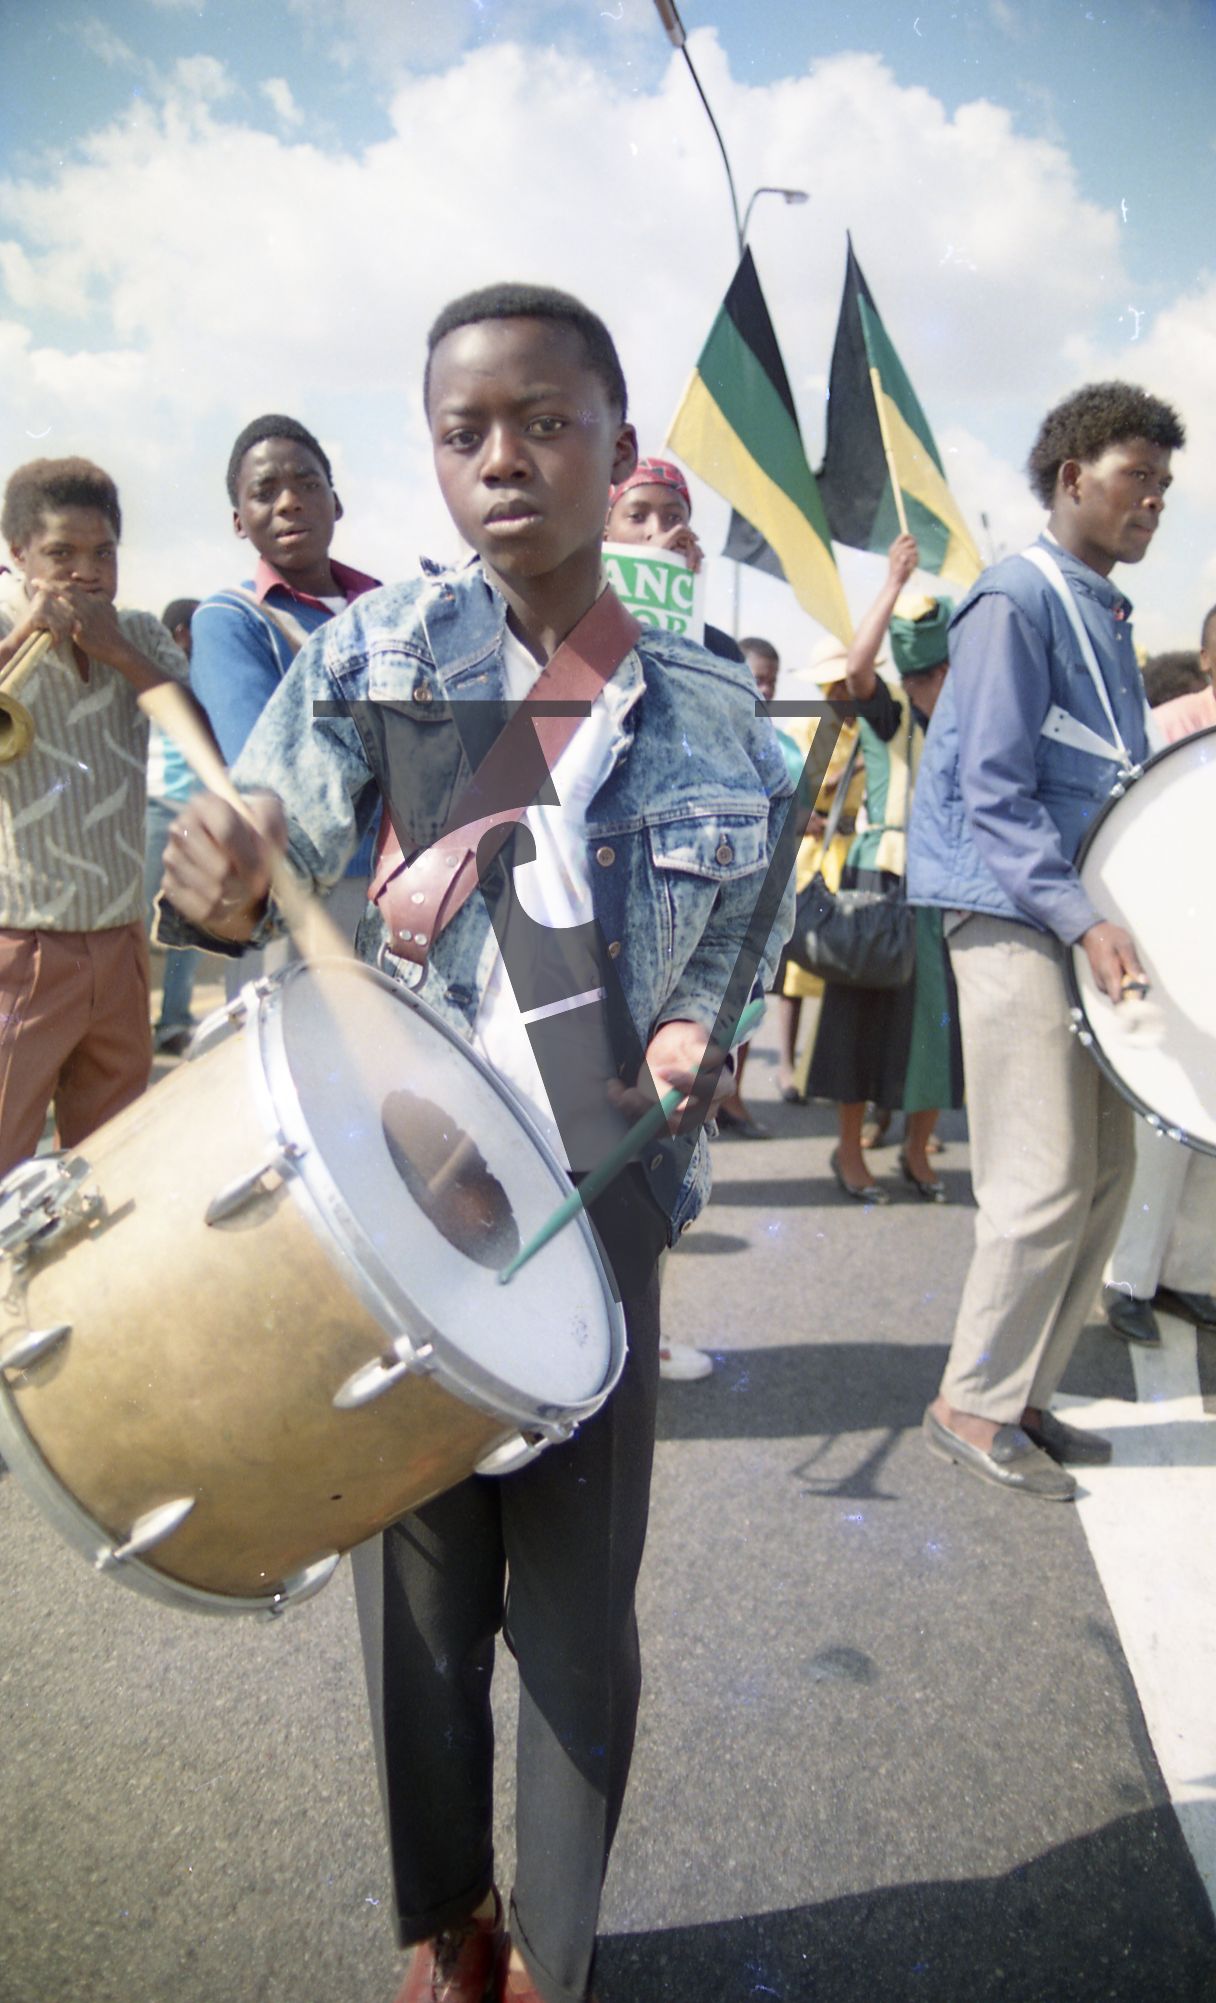 South Africa, ANC parade, boy drumming, flags.